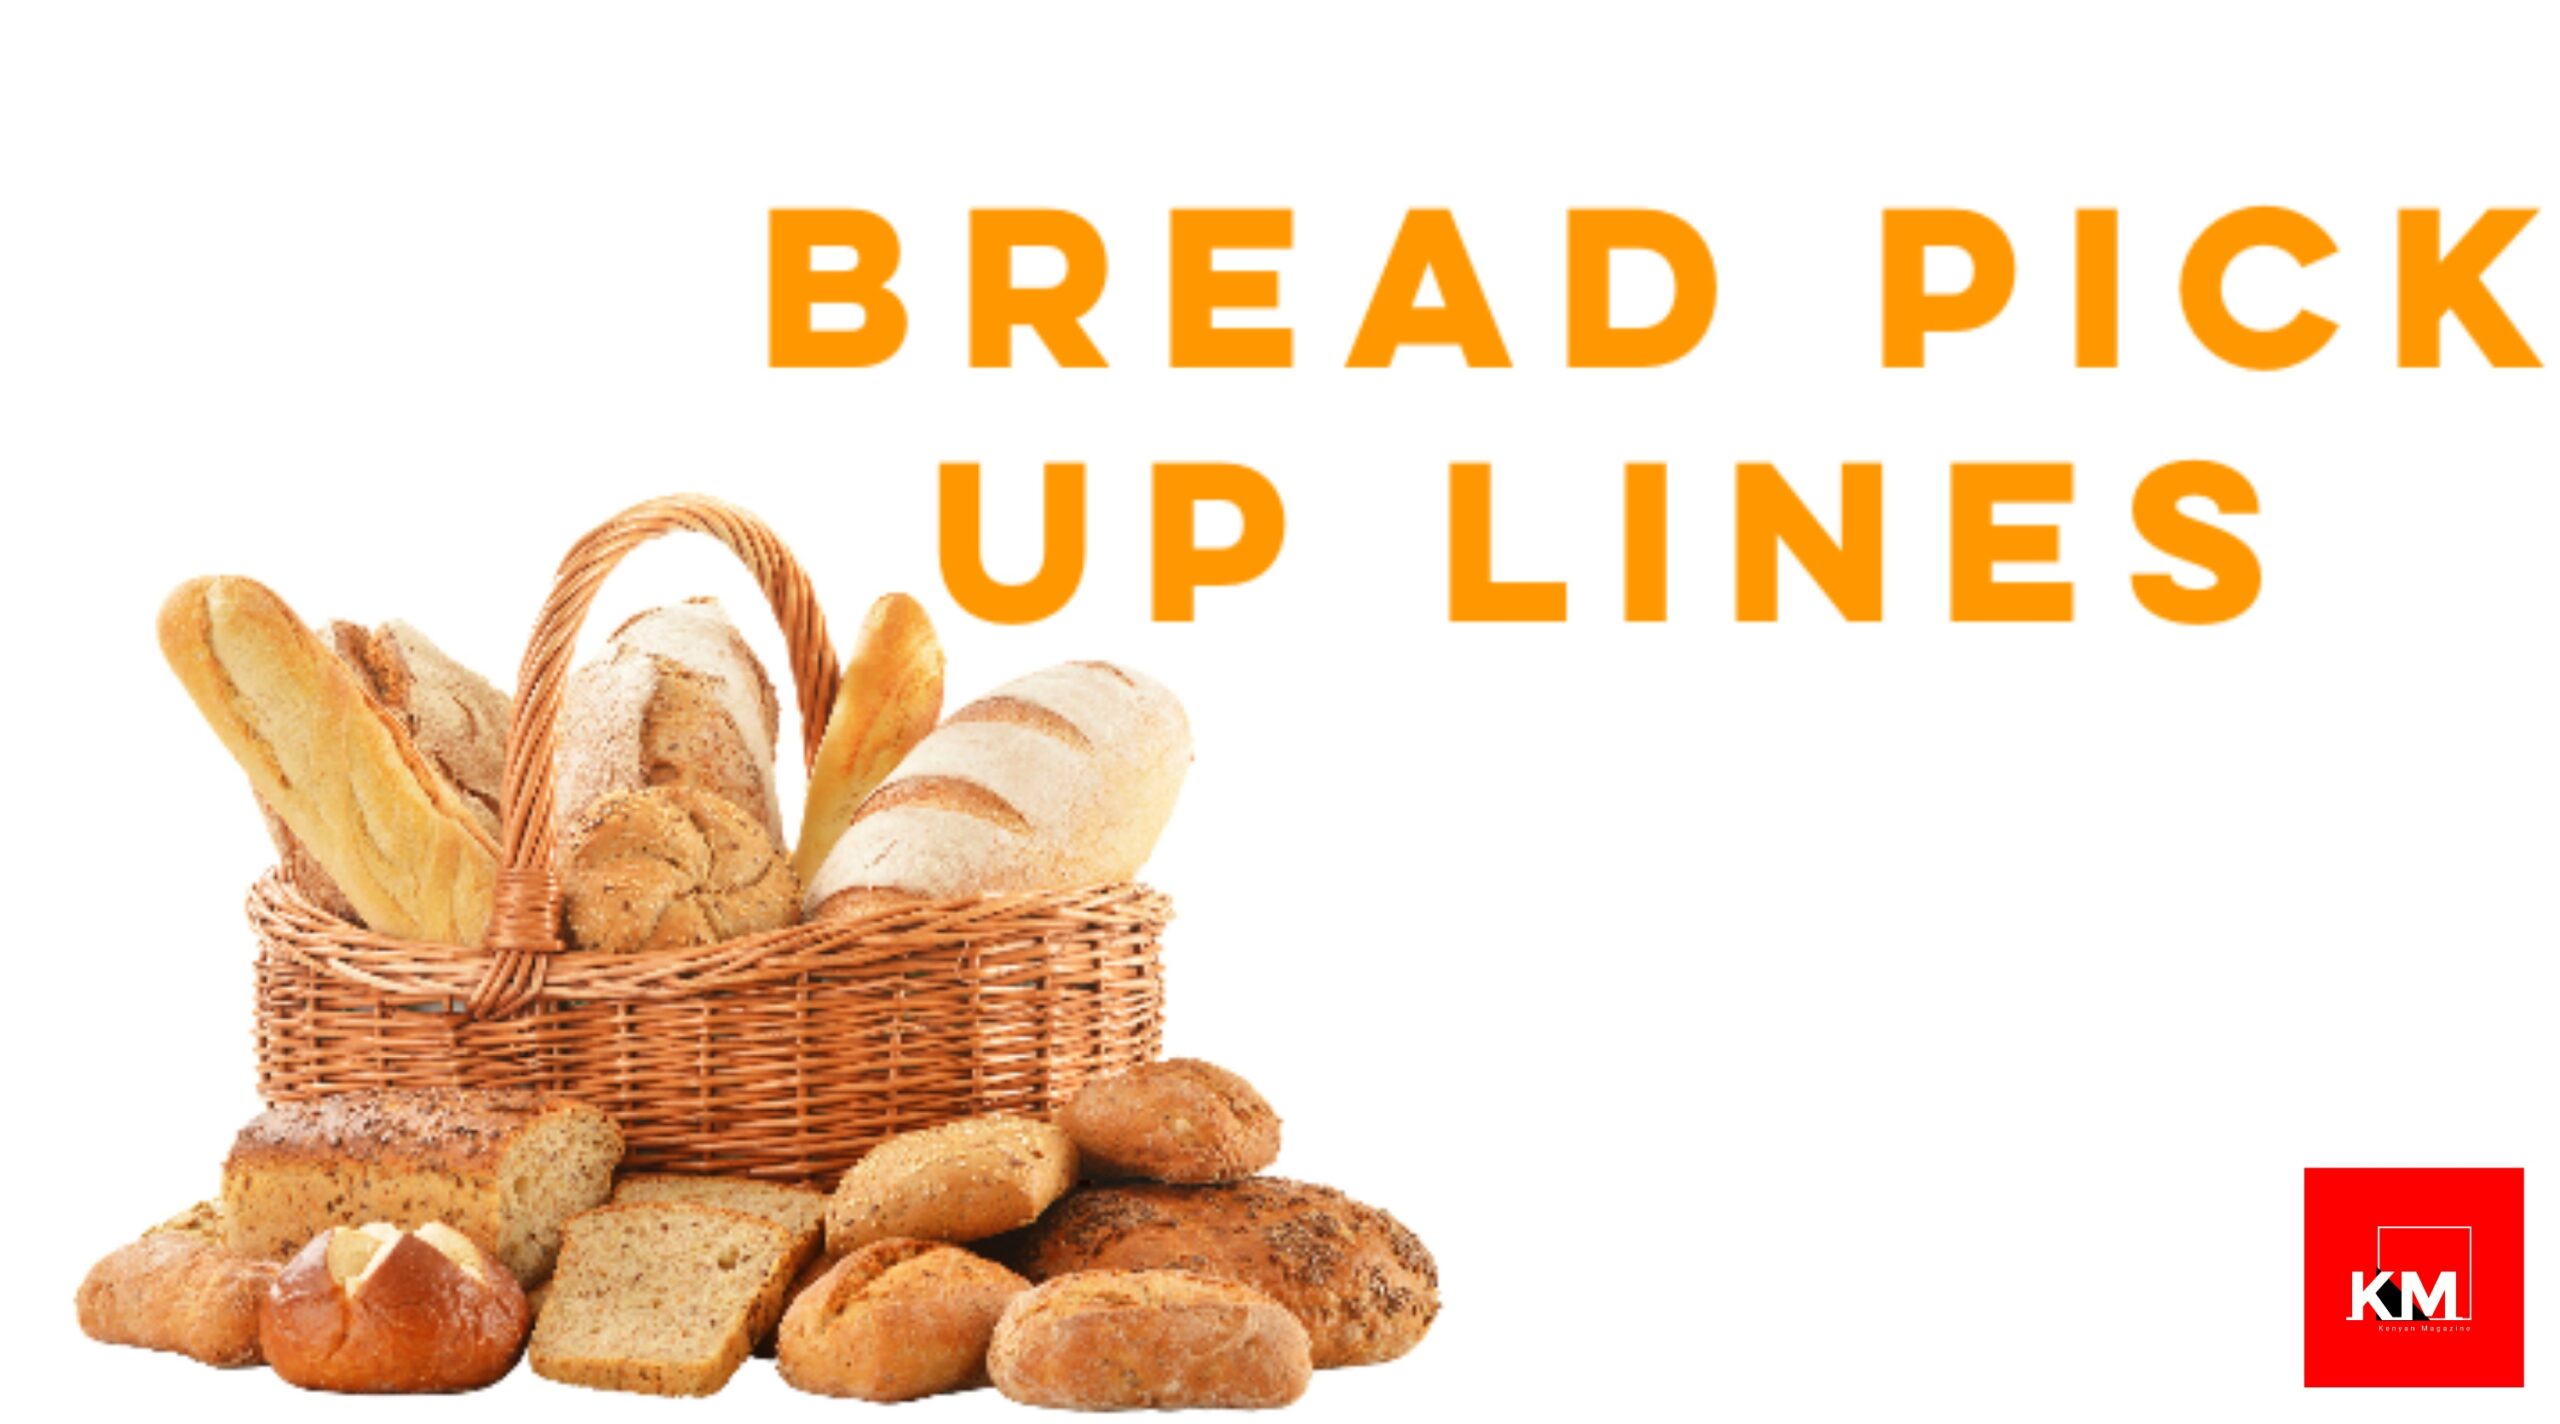 Bread pick up lines